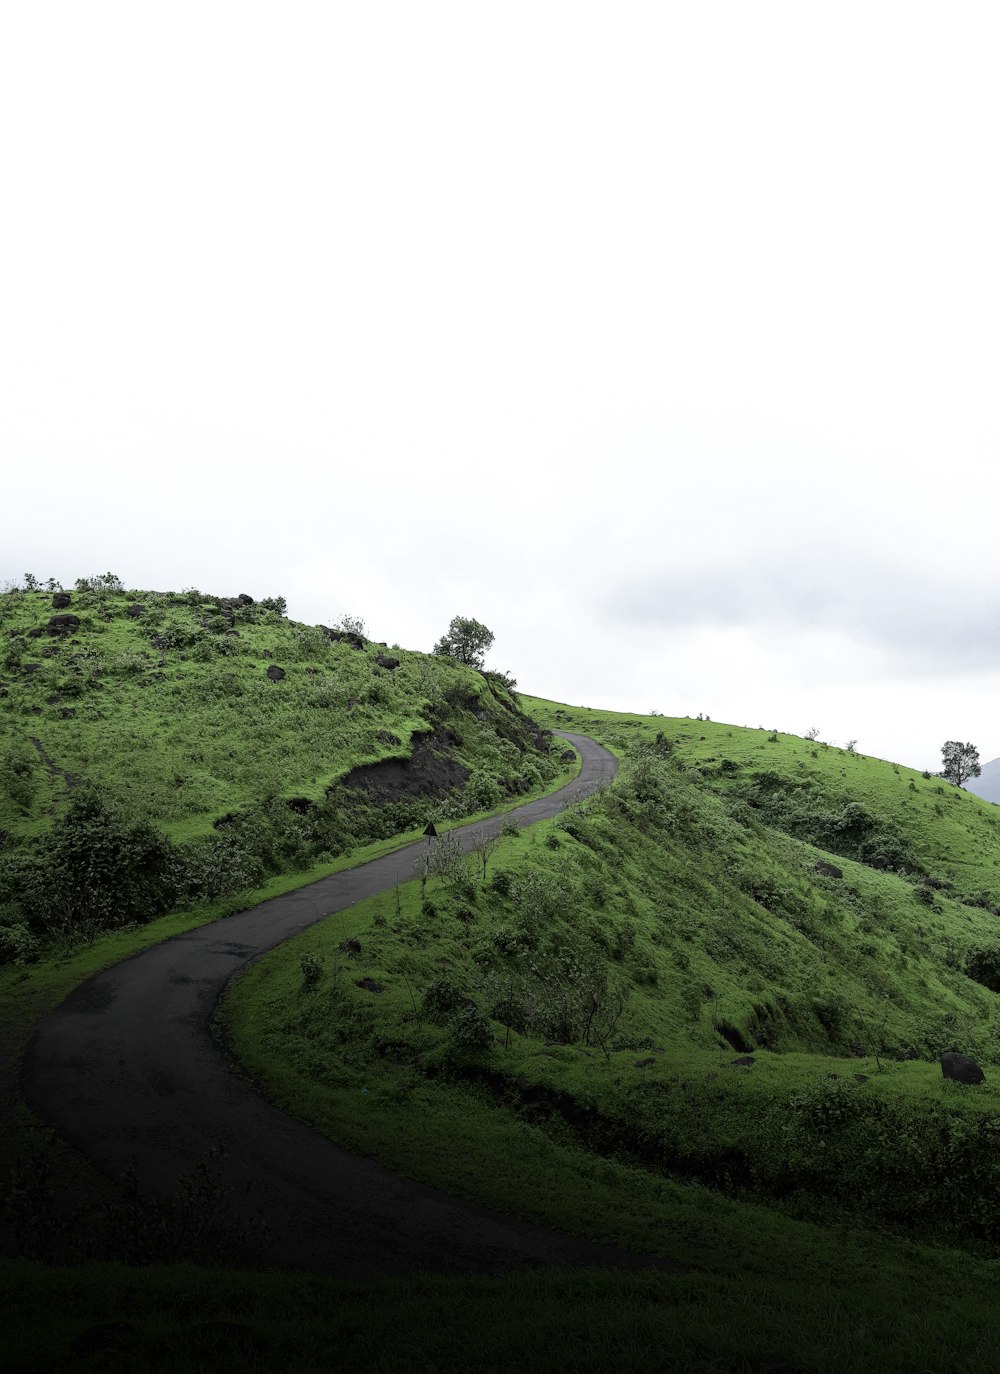 a hill with a winding road going up it